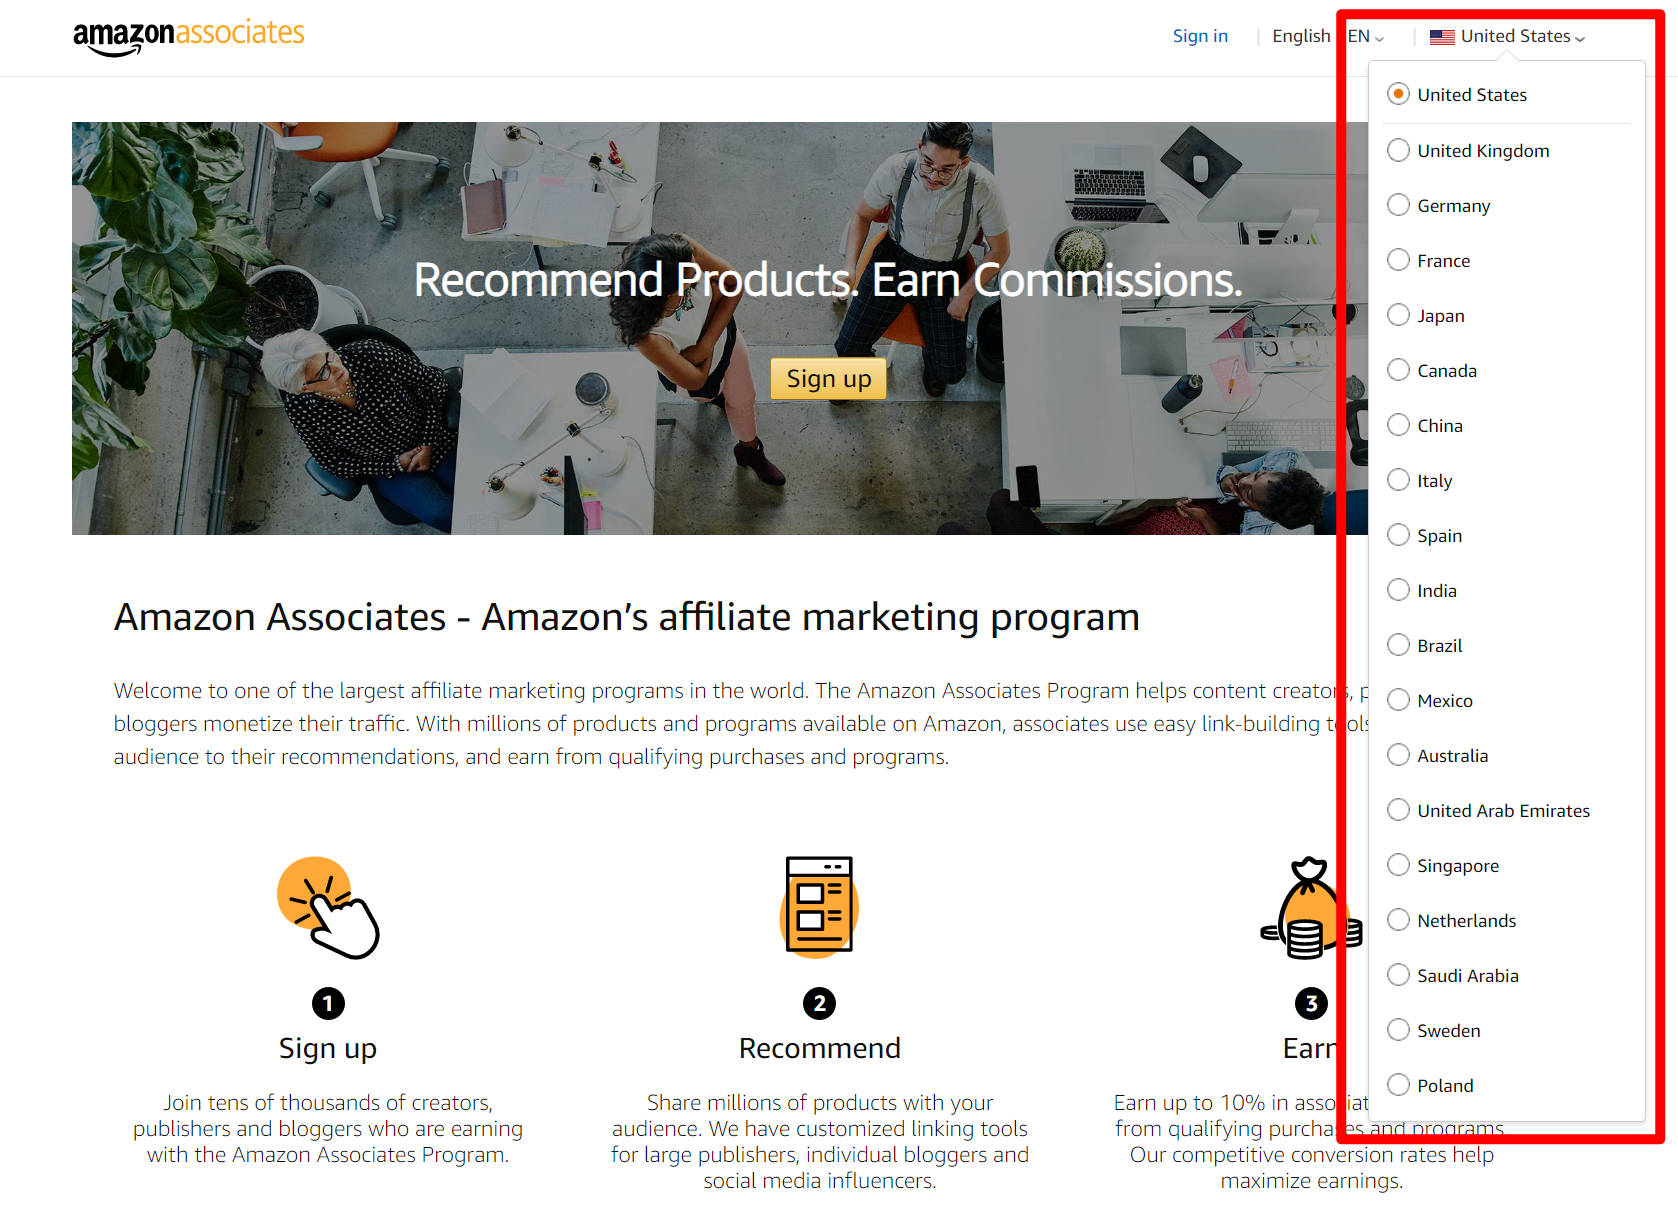 How to become an Amazon affiliate in different regions